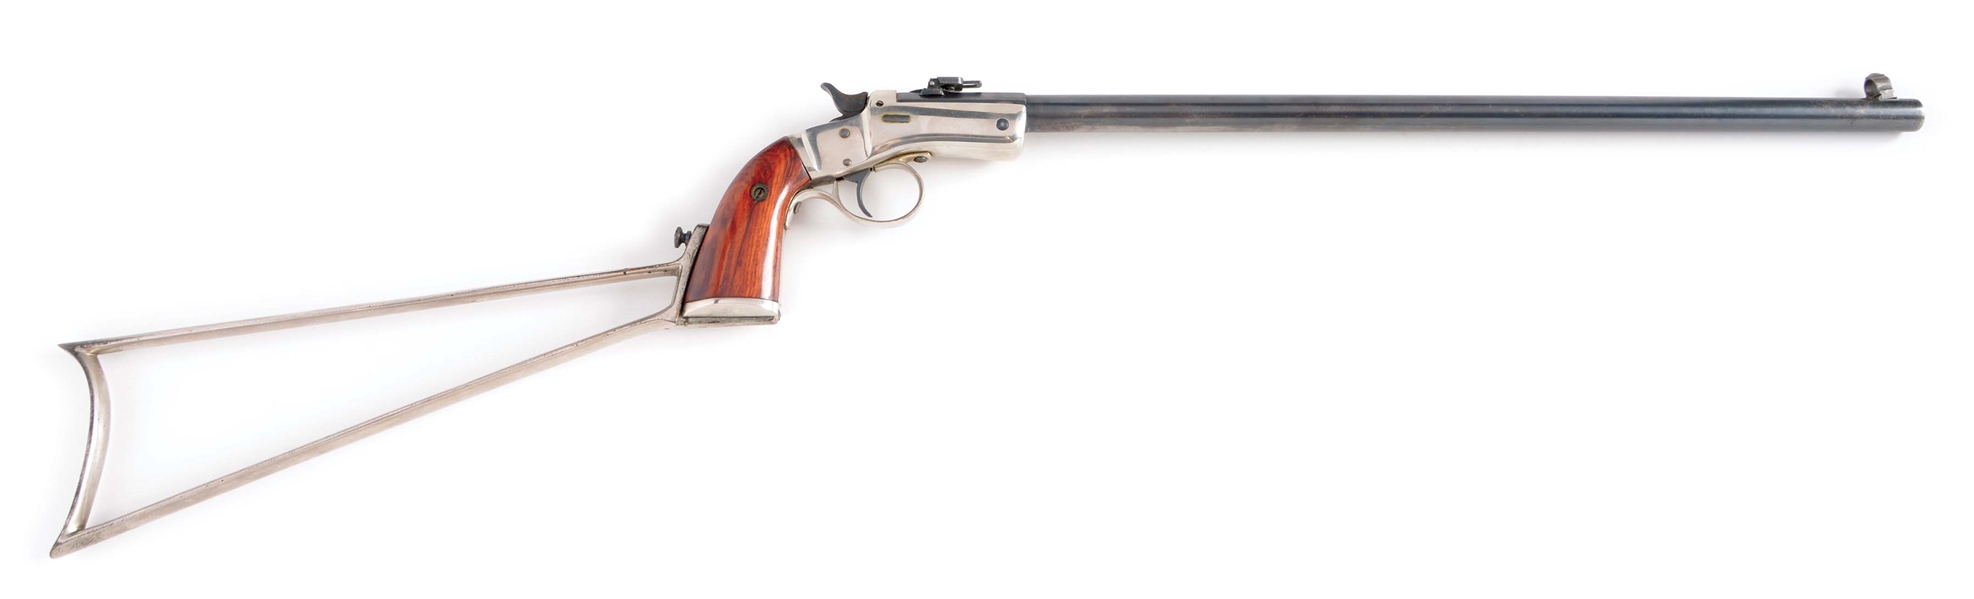 (C) STEVENS NEW MODEL POCKET RIFLE NO. 40 WITH STOCK.